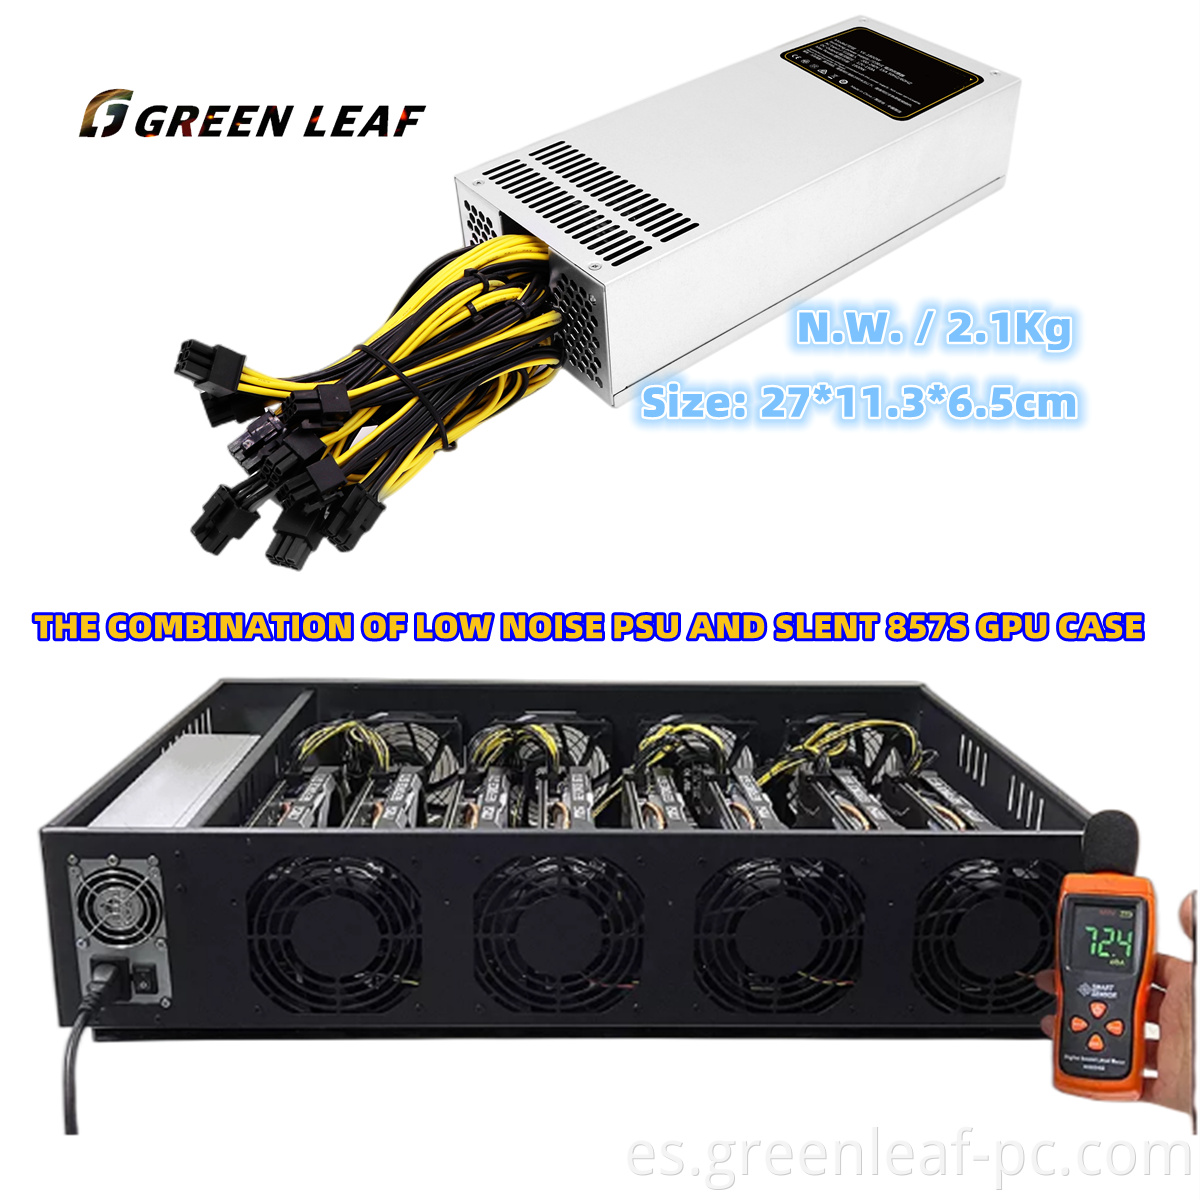 Low Noise Computer Power Supply